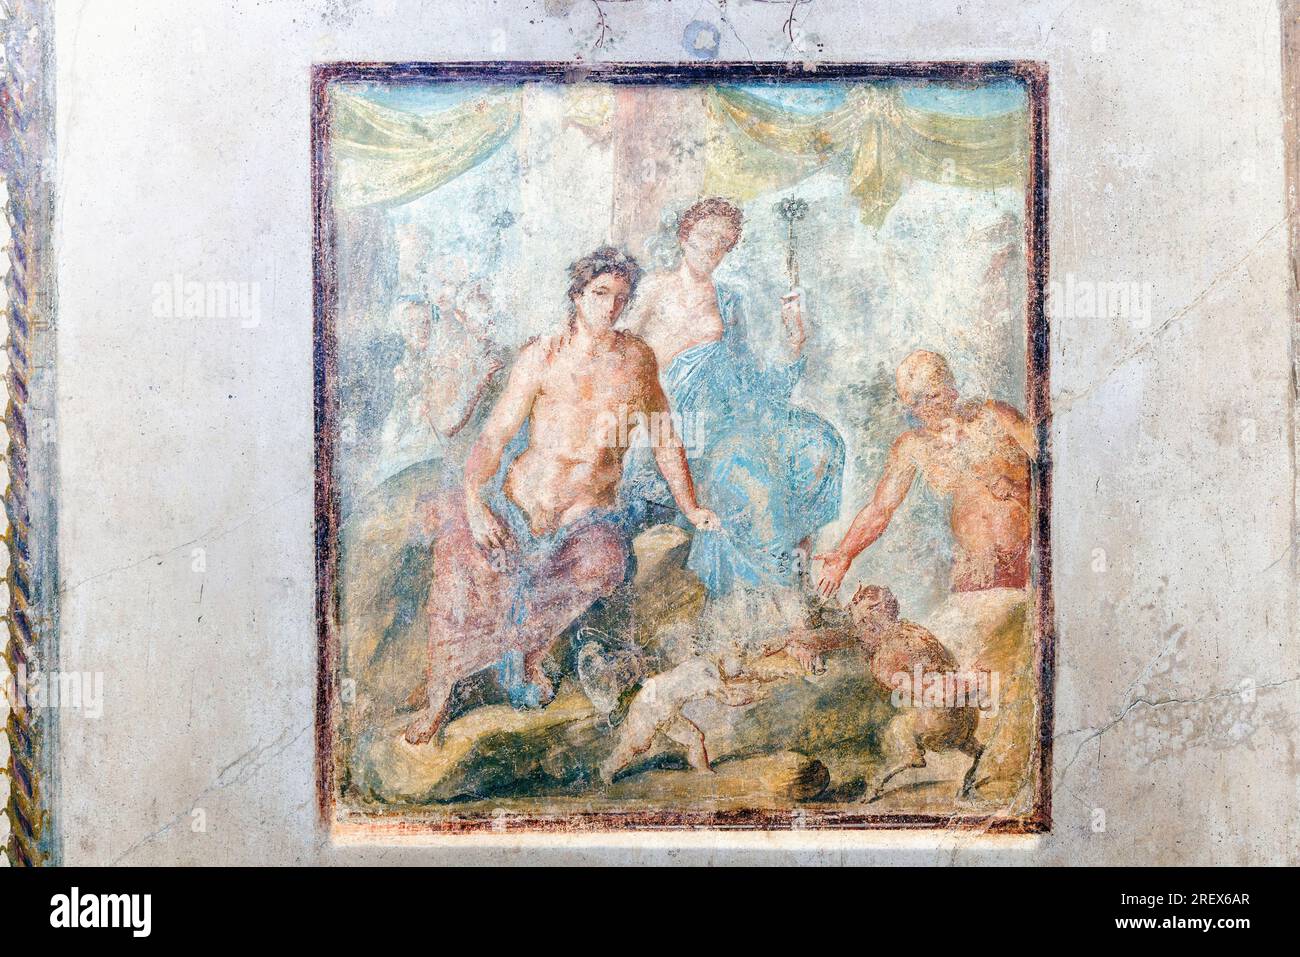 Pompeii Archaeological Site, Campania, Italy.  Fresco illustrating the Greek myth of the wrestling match between Pan and Eros watched by Dionysus, Ari Stock Photo